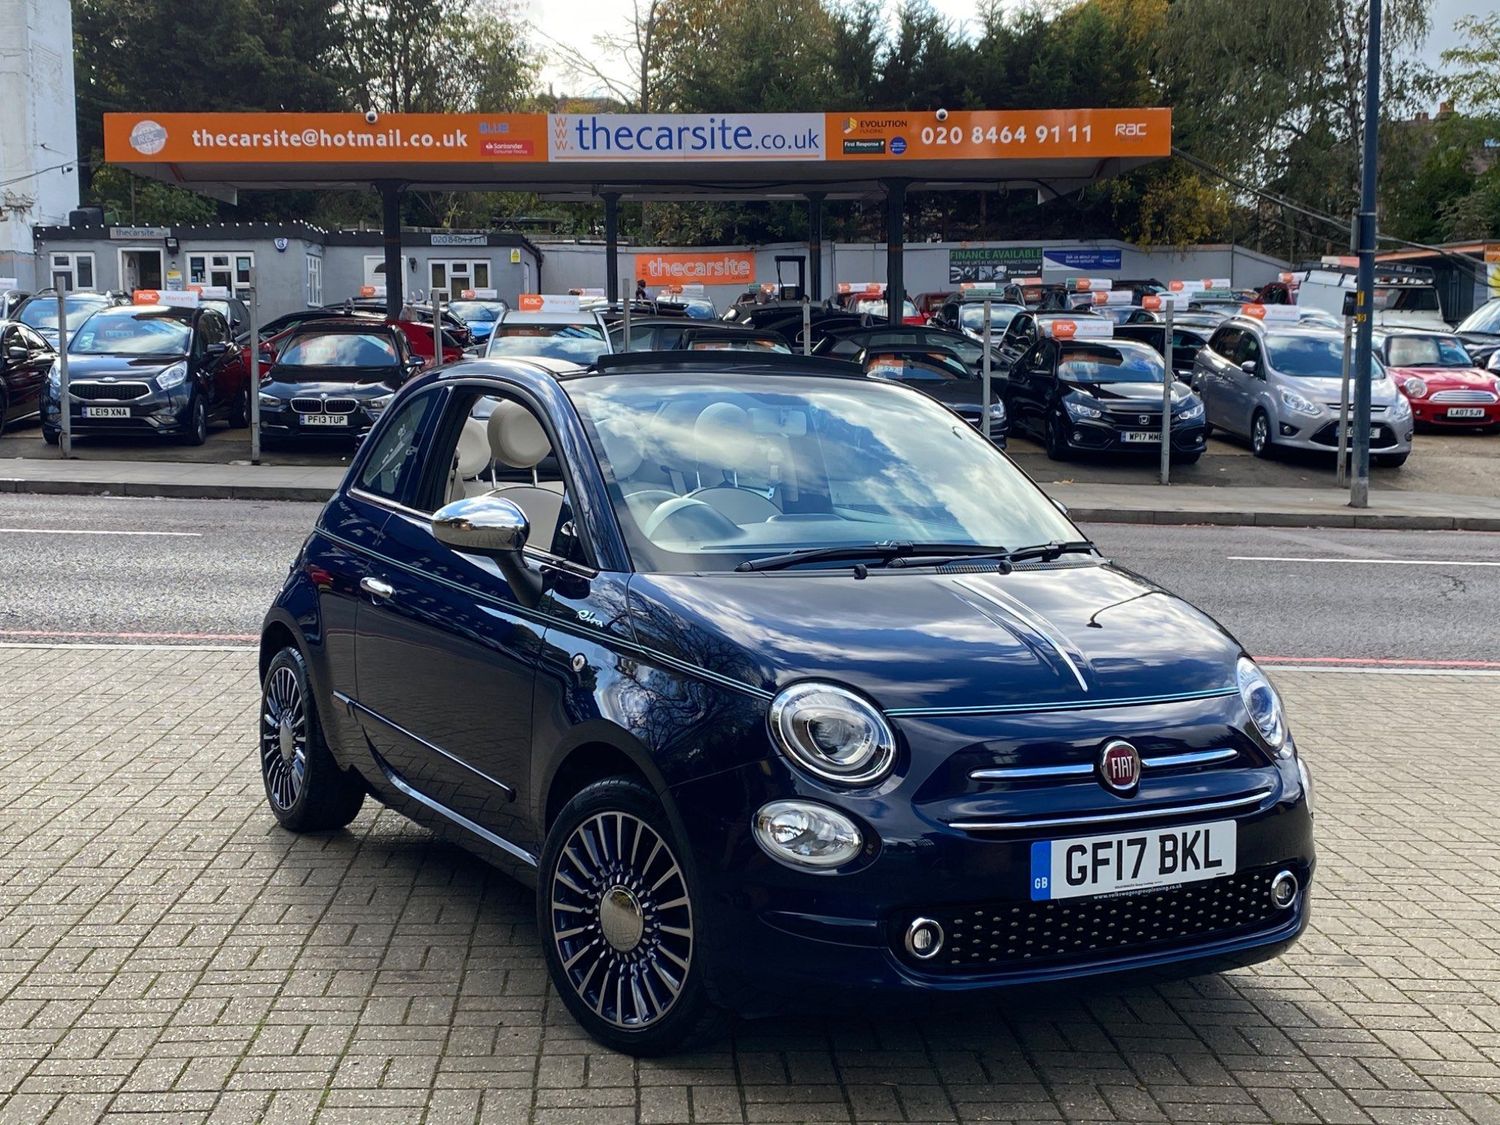 Used Fiat 500c In Bromley Kent The Car Site London